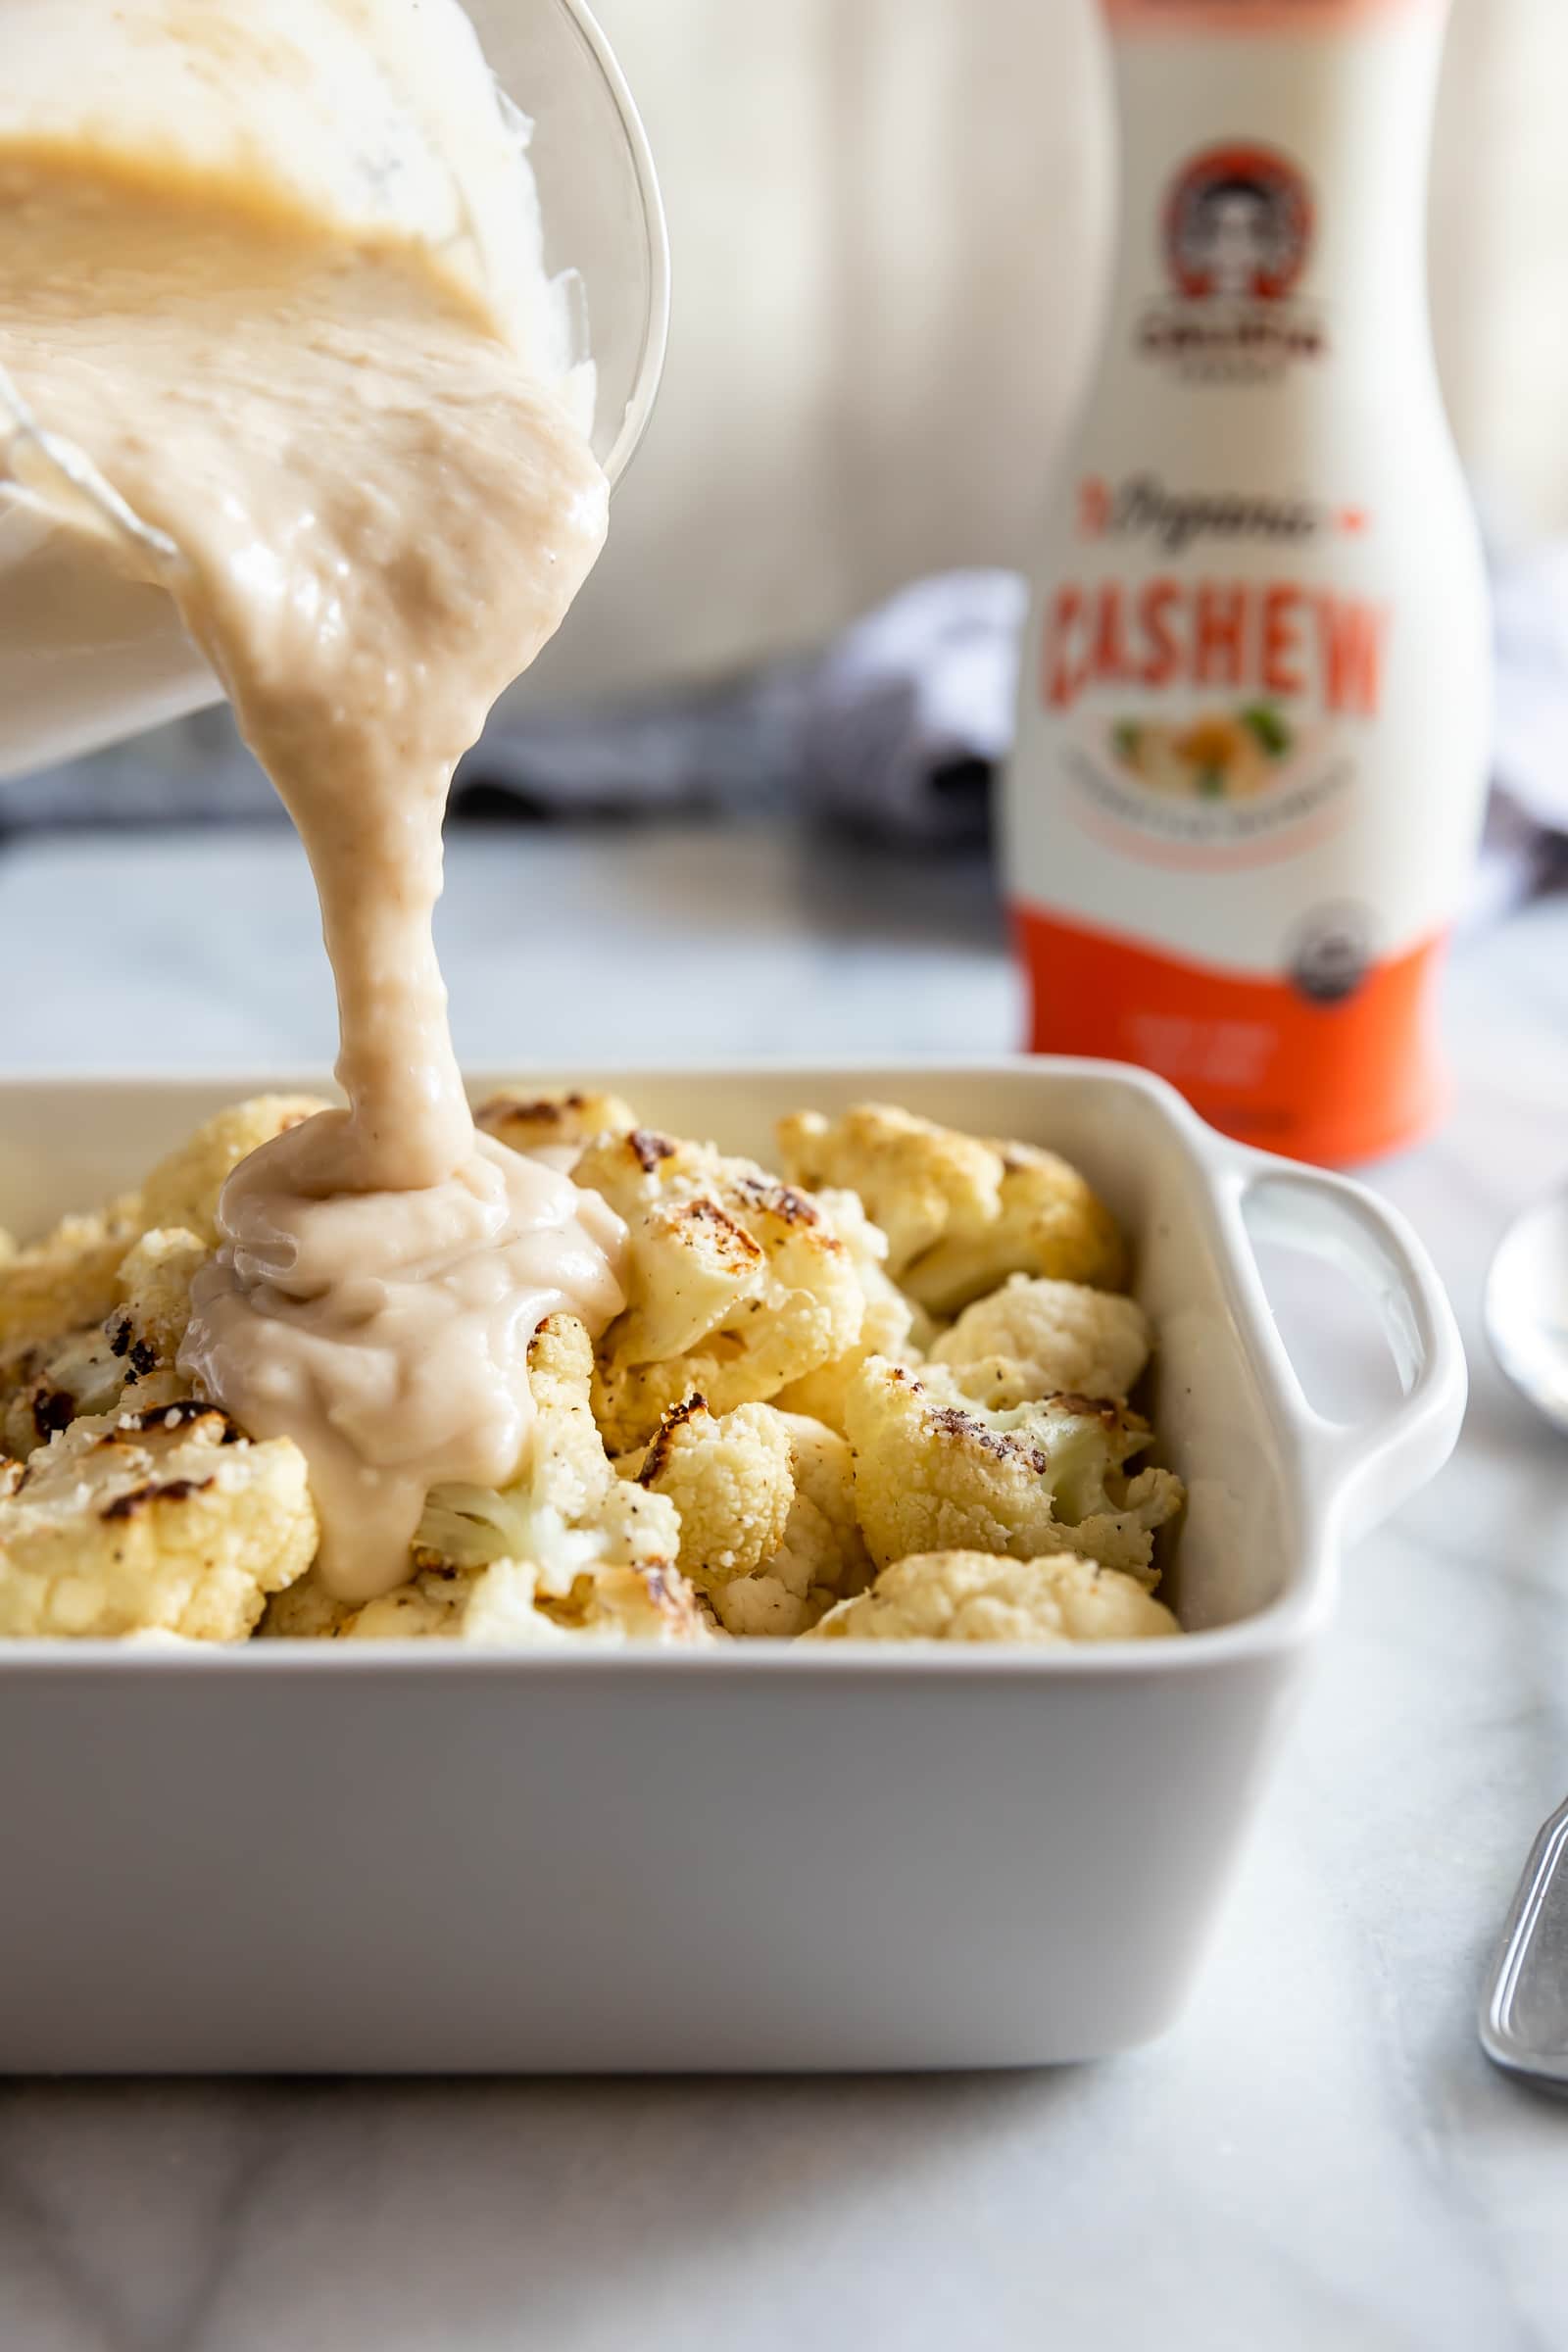 A deliciously creamy roasted cauliflower gratin made with a simple cashew cheese sauce then topped with a cheesy bread crumb topping.